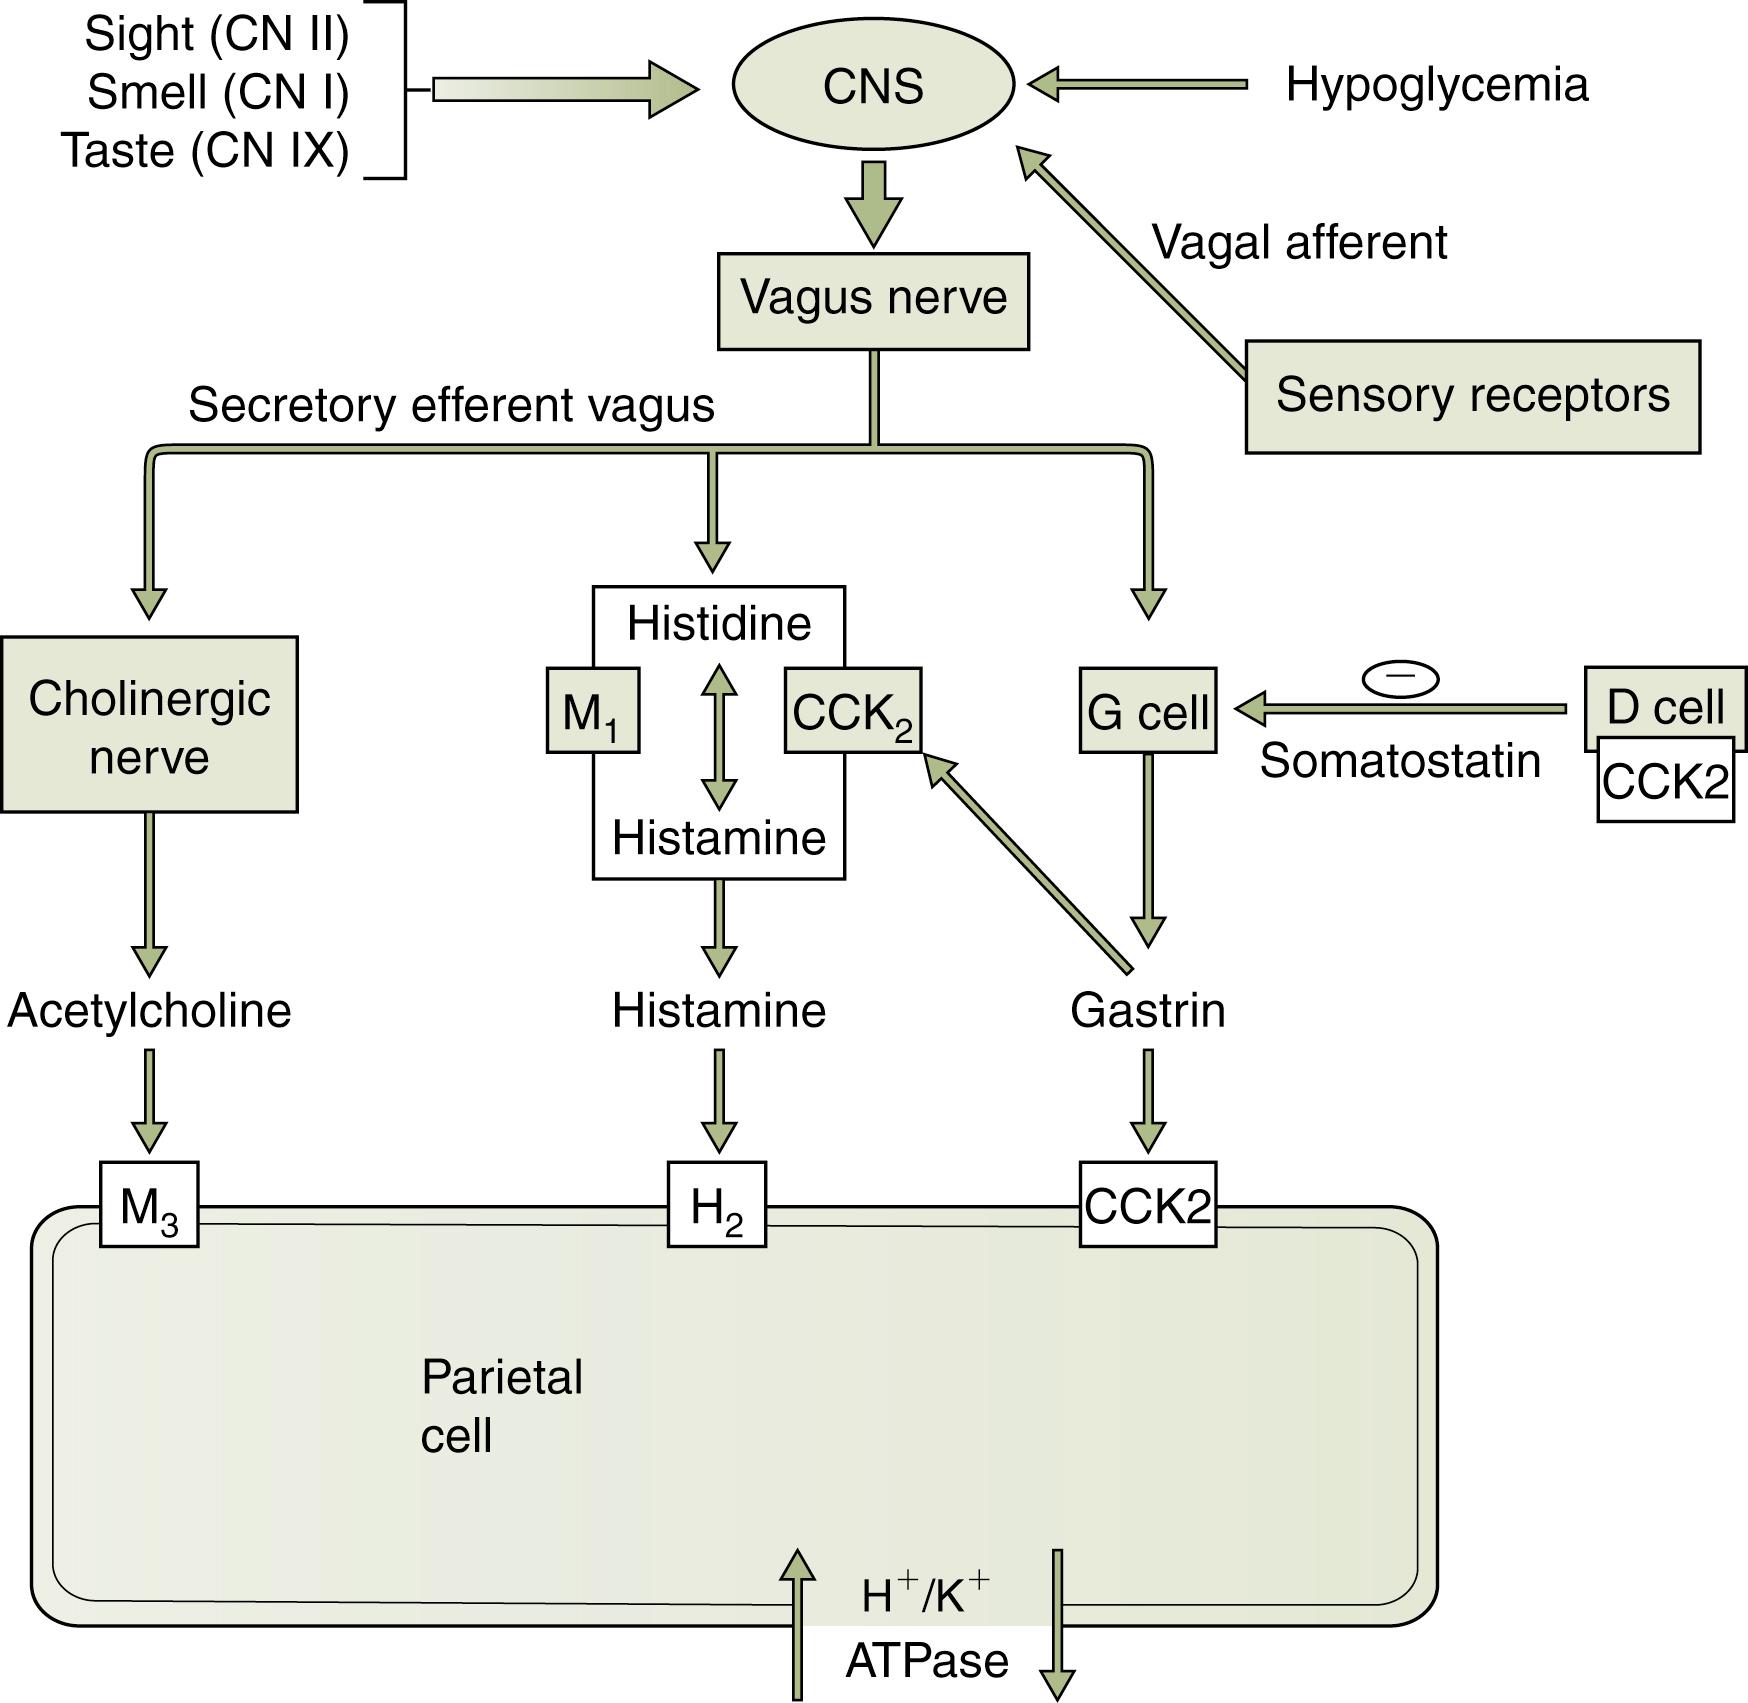 Fig. 24.3, Secretory influences and hormones involved in the synthesis and secretion of hydrochloric acid by parietal cells. CCK, Cholecystokinin; CNS, central nervous system.